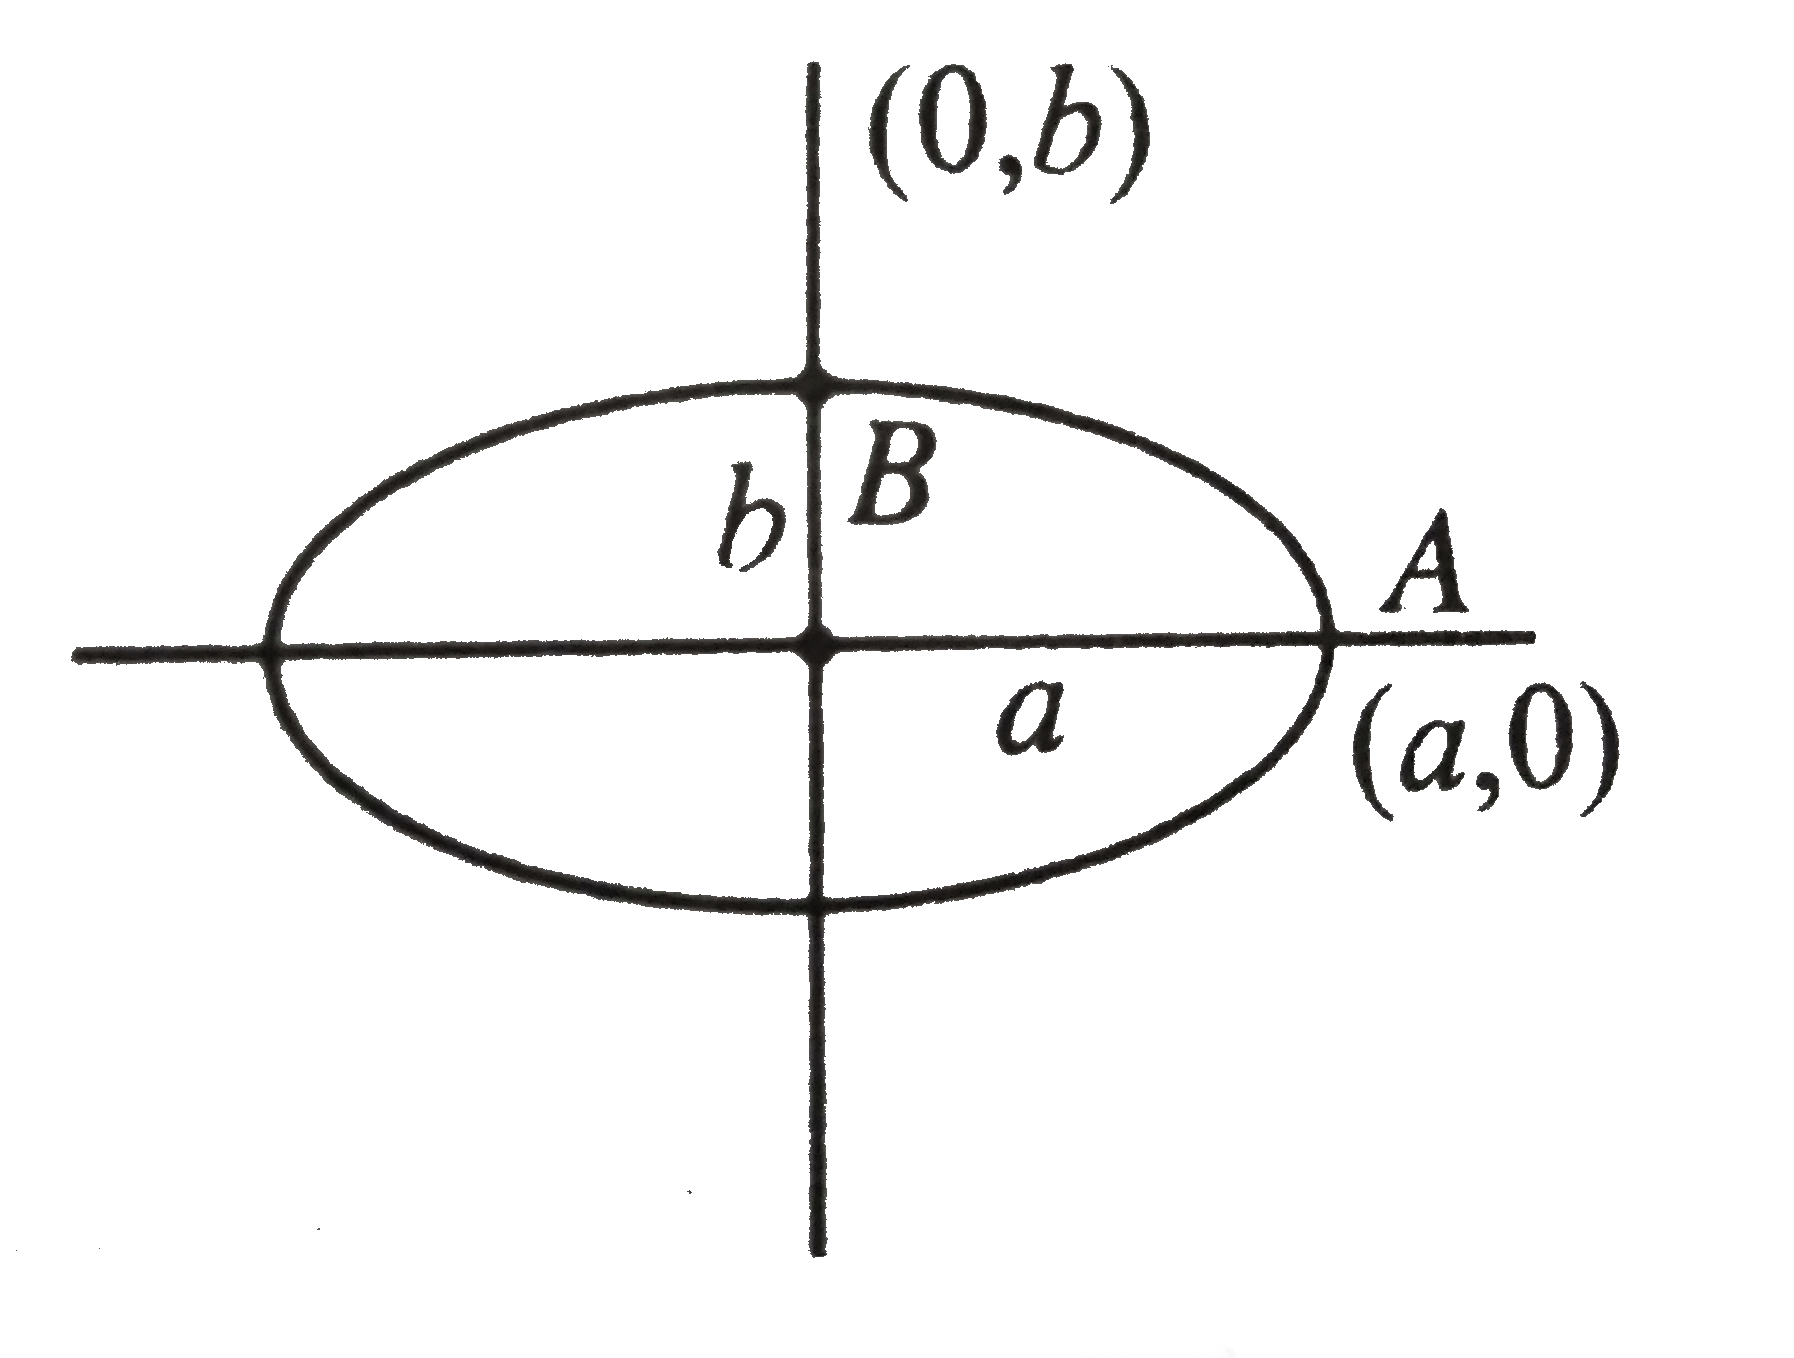 The Coordinate Of A Particle Moving In A Plane Are Given By X